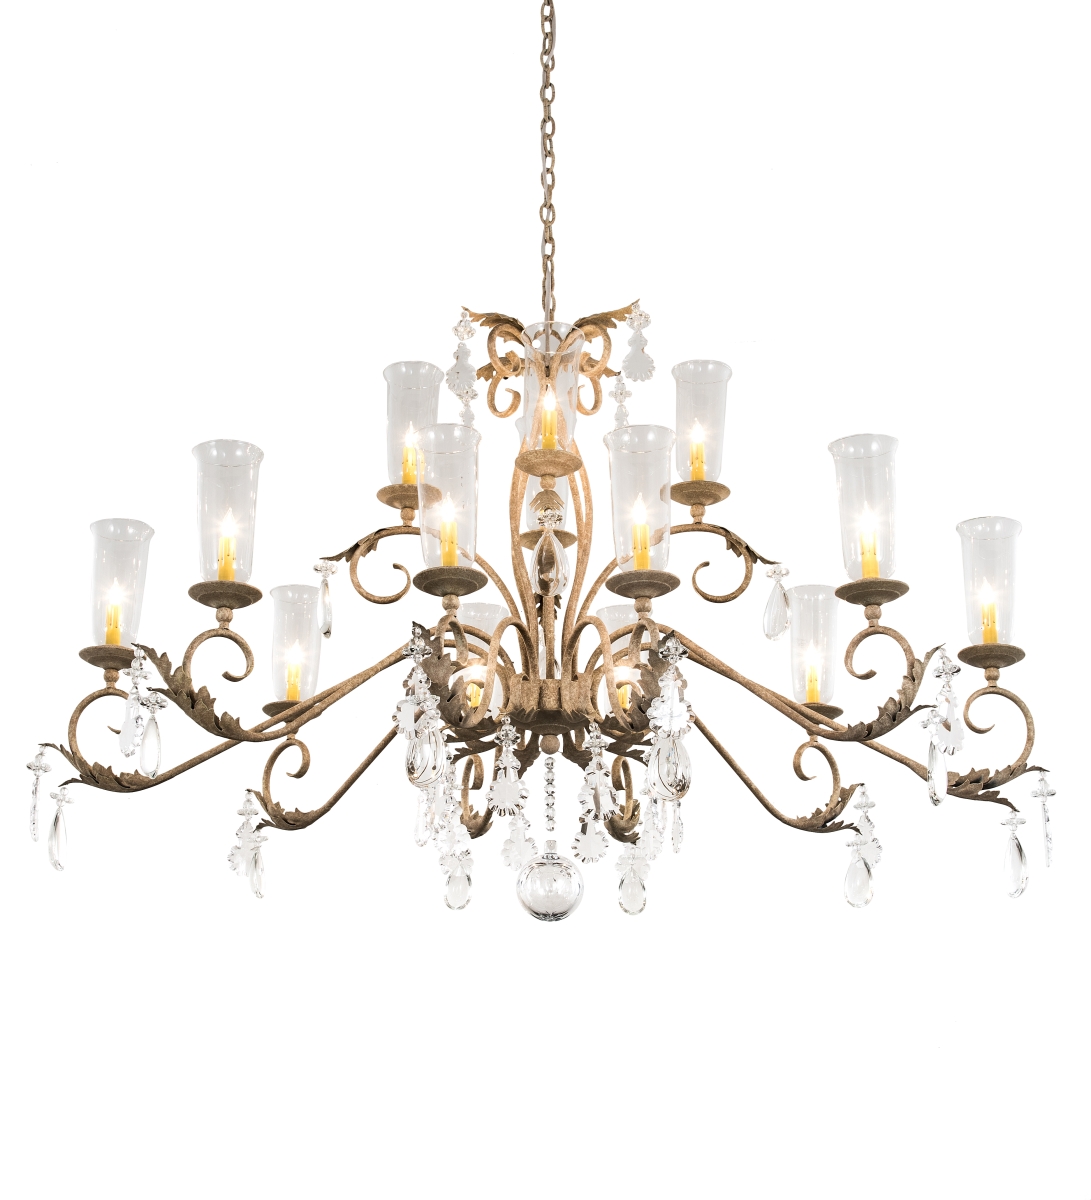 87636.60.013t.x 116 X 62 In. Windsor 14 Bulb Chandelier, Tuscan Ivory